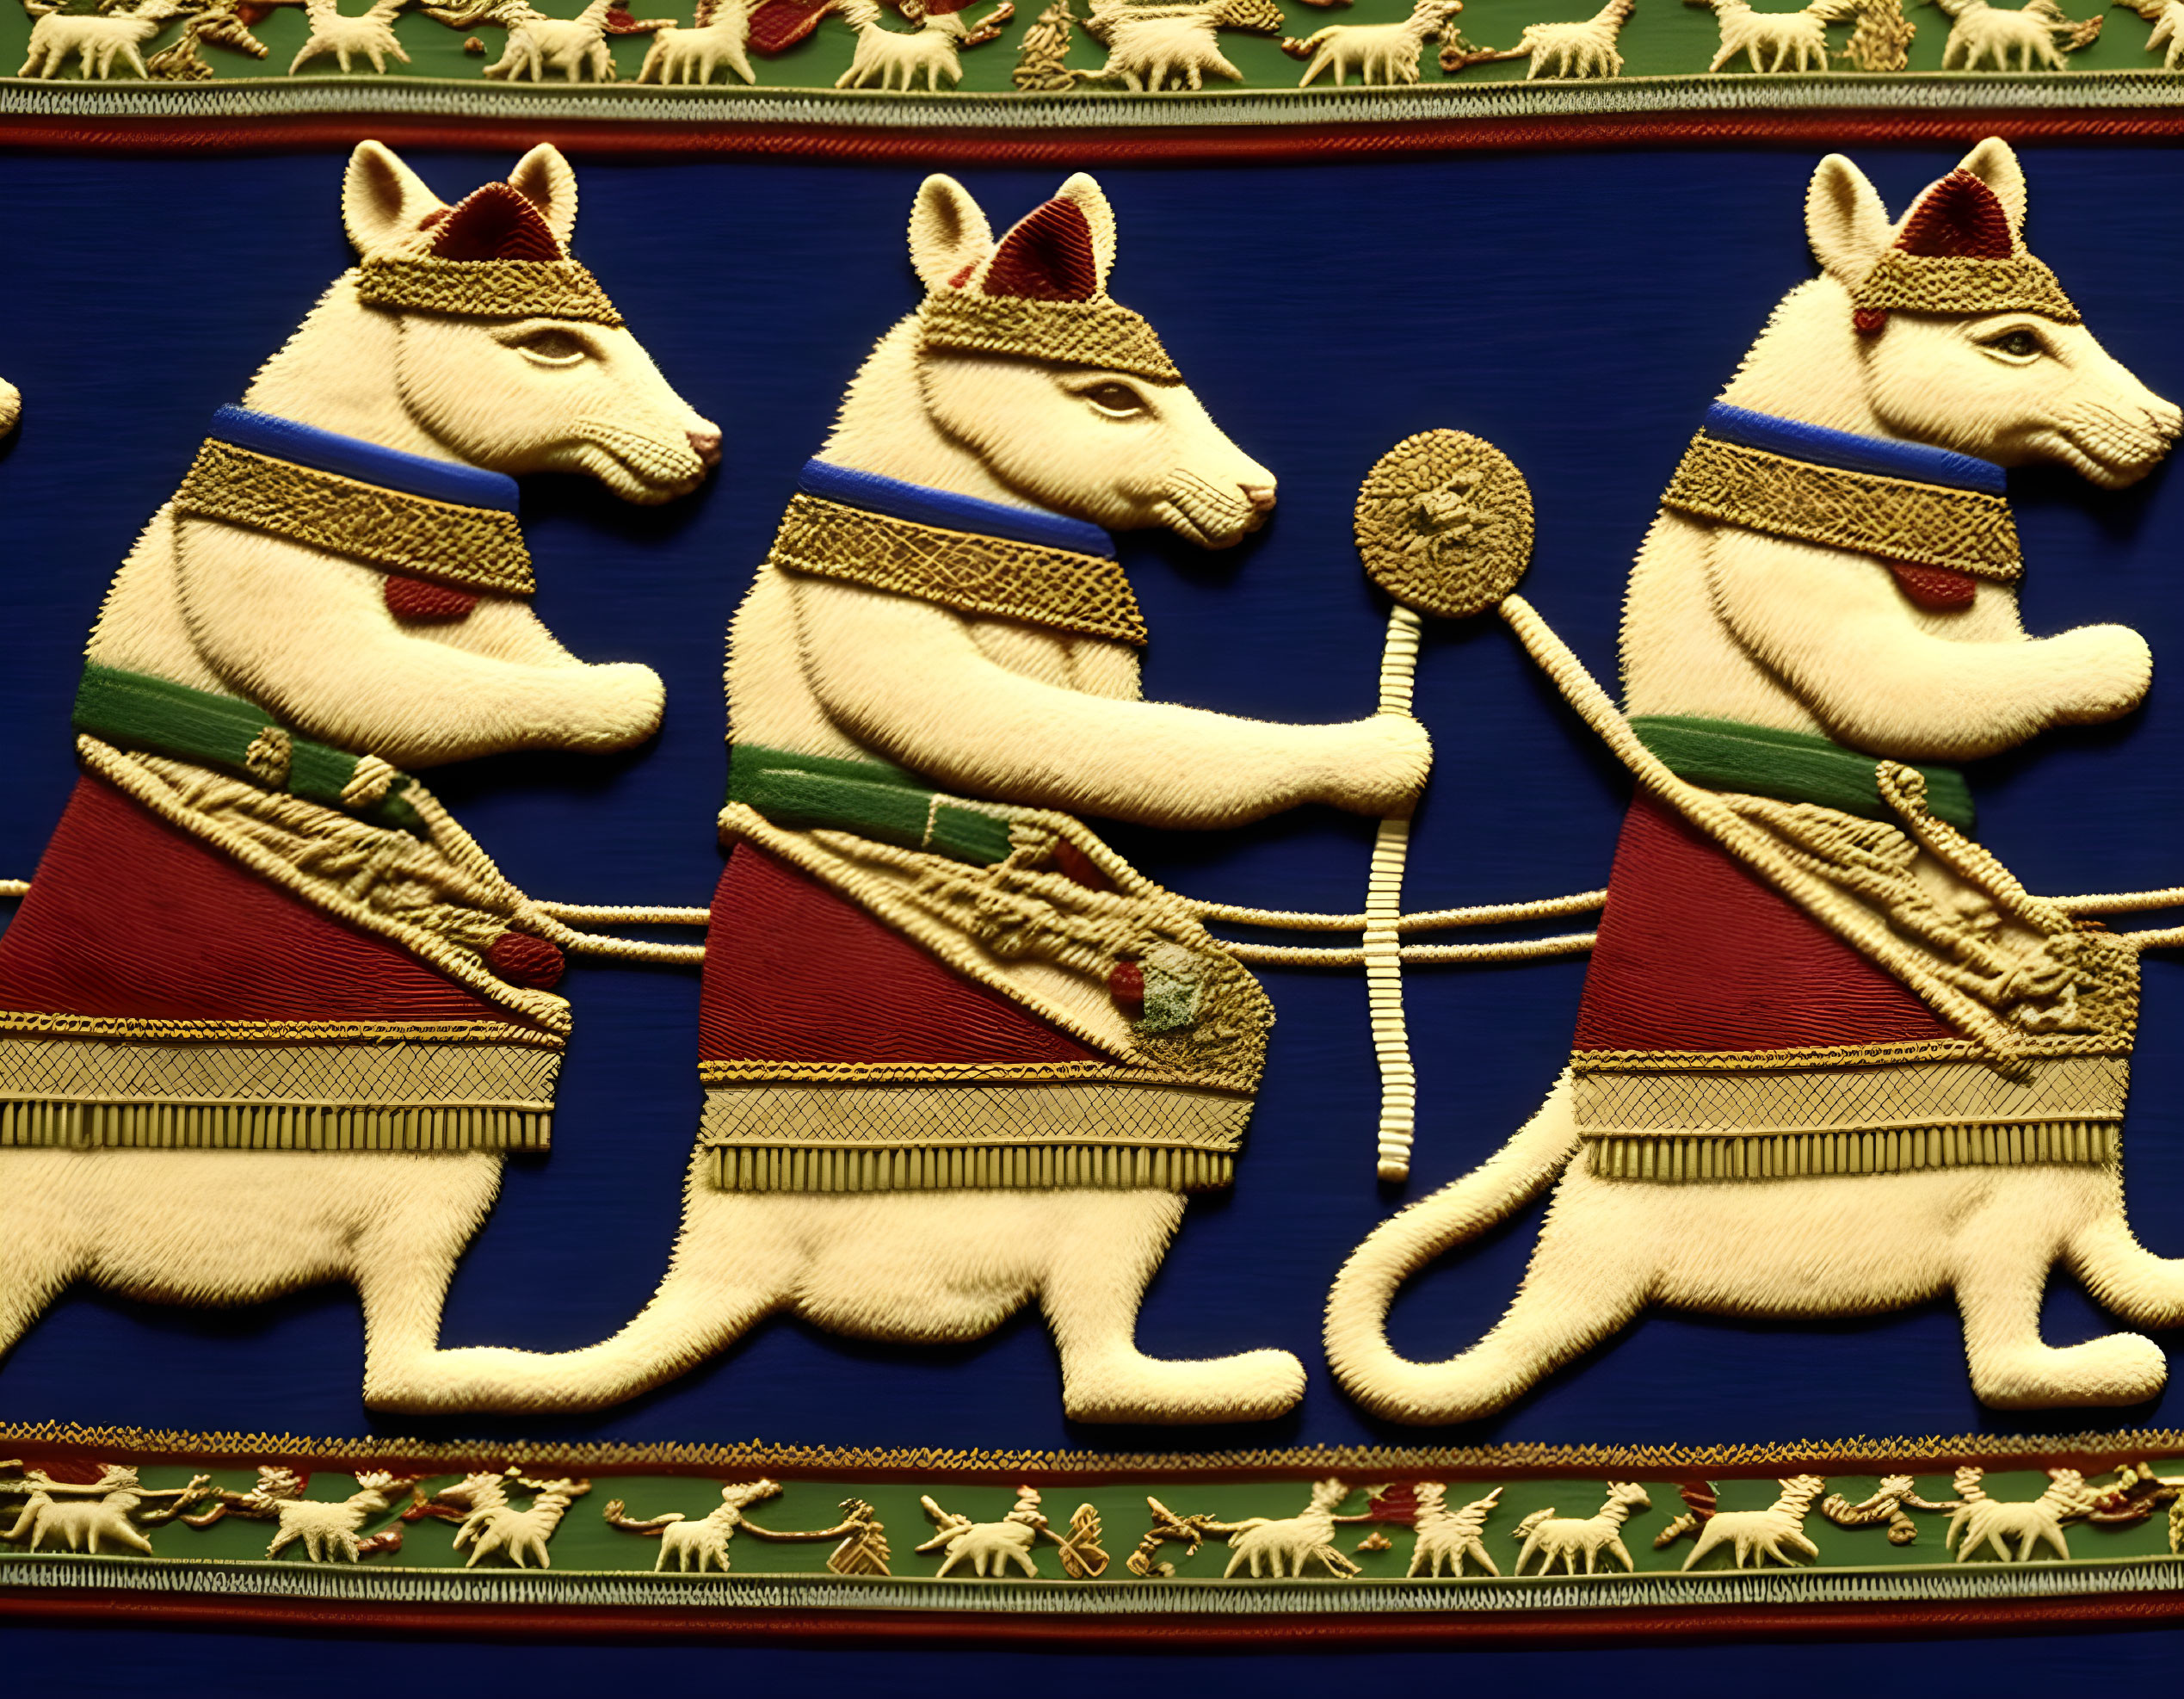 Stylized mice in ancient Egyptian attire on blue and gold background